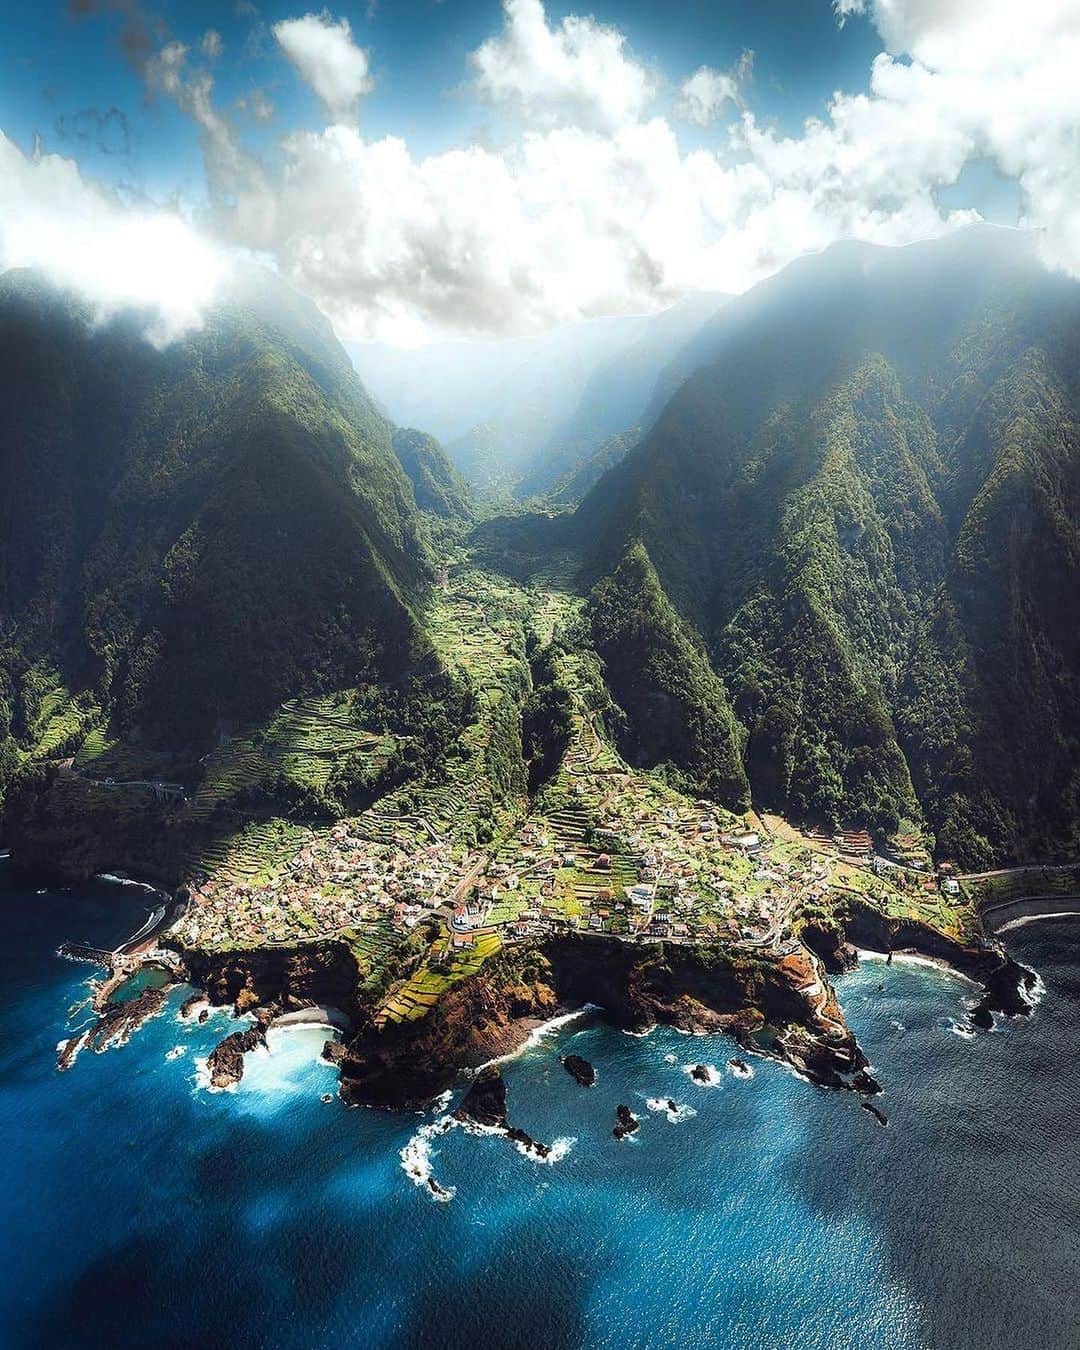 Coronaのインスタグラム：「Within the green peaks of Madeira lies the quaint village of Seixal. As beautiful as it looks from a distance, the area boasts several options for those seeking adventure beyond the town.   For those wanting to try their hand at hiking, head to Miradouro do Veu da Noiva which fittingly translates to ‘The Bridal Veil Waterfall’. This impressive waterfall cascades over 110M high and into the ocean with stunning views of the coast once you reach the top.   If you travel further south, you’ll come across Chão da Ribeira valley. A short hike of just 10km brings you to the laurislva forest, where you’ll find more stunning waterfalls on the way and incredible views of Madeira.  #ThisIsLiving   📷: @ilya.somewhere   #Portugal」